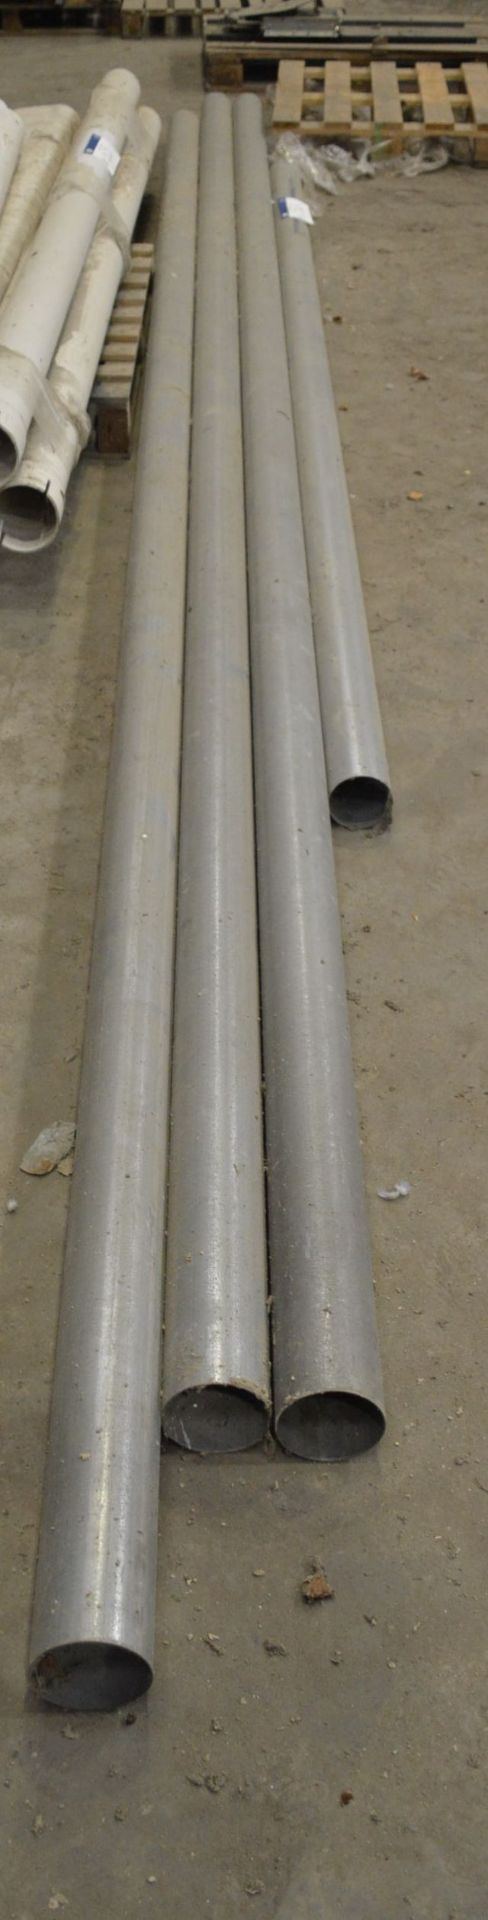 Four Lengths Galvanised Steel Piping